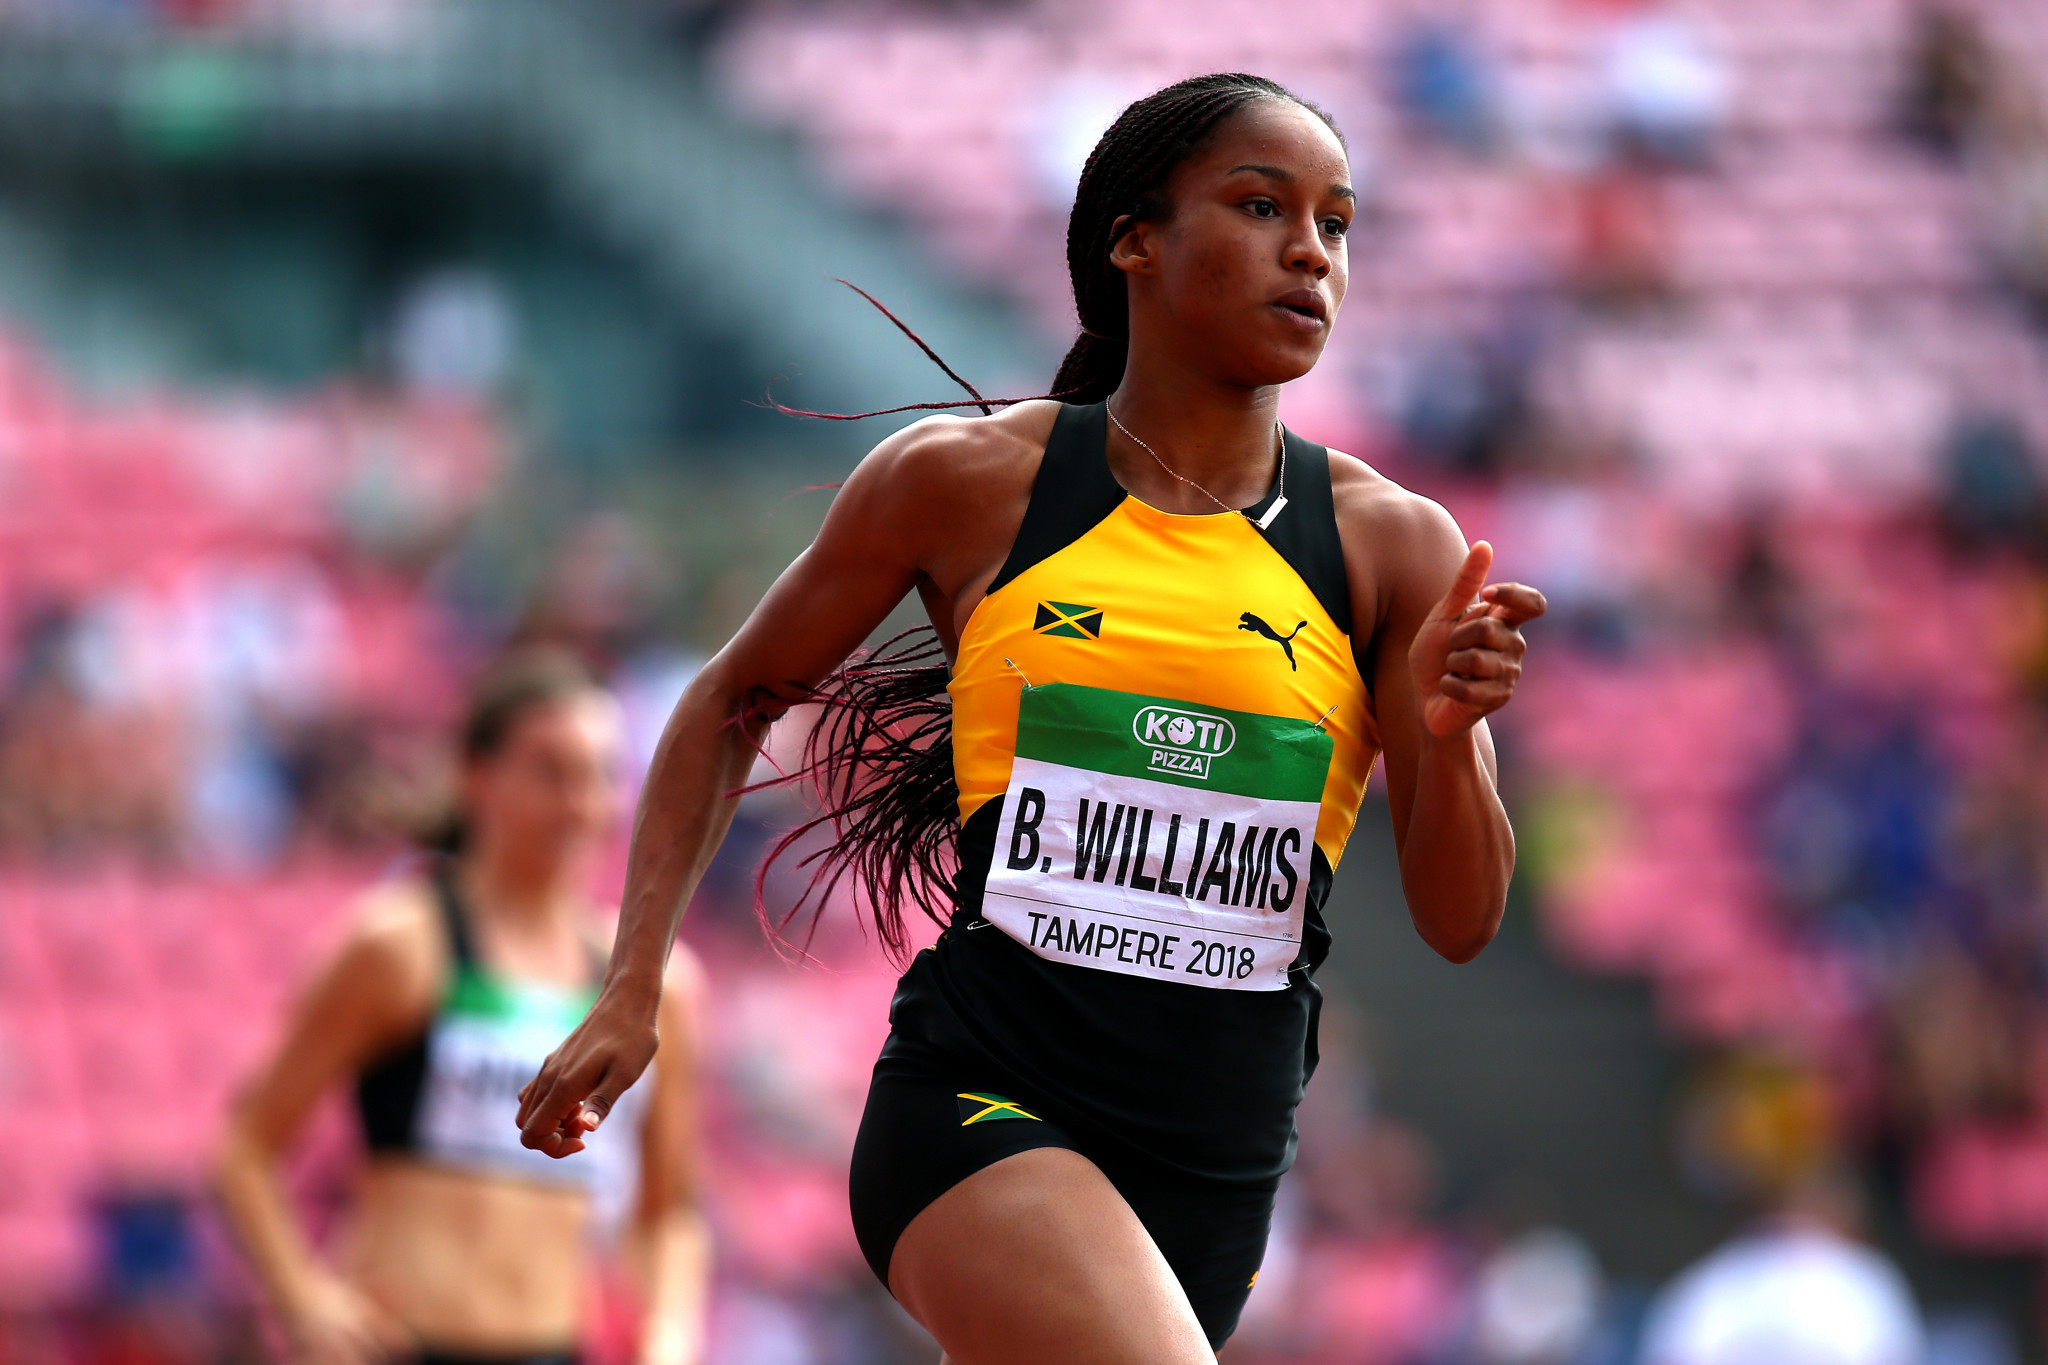 Jamaican sprinter Williams reprimanded after failed drugs test